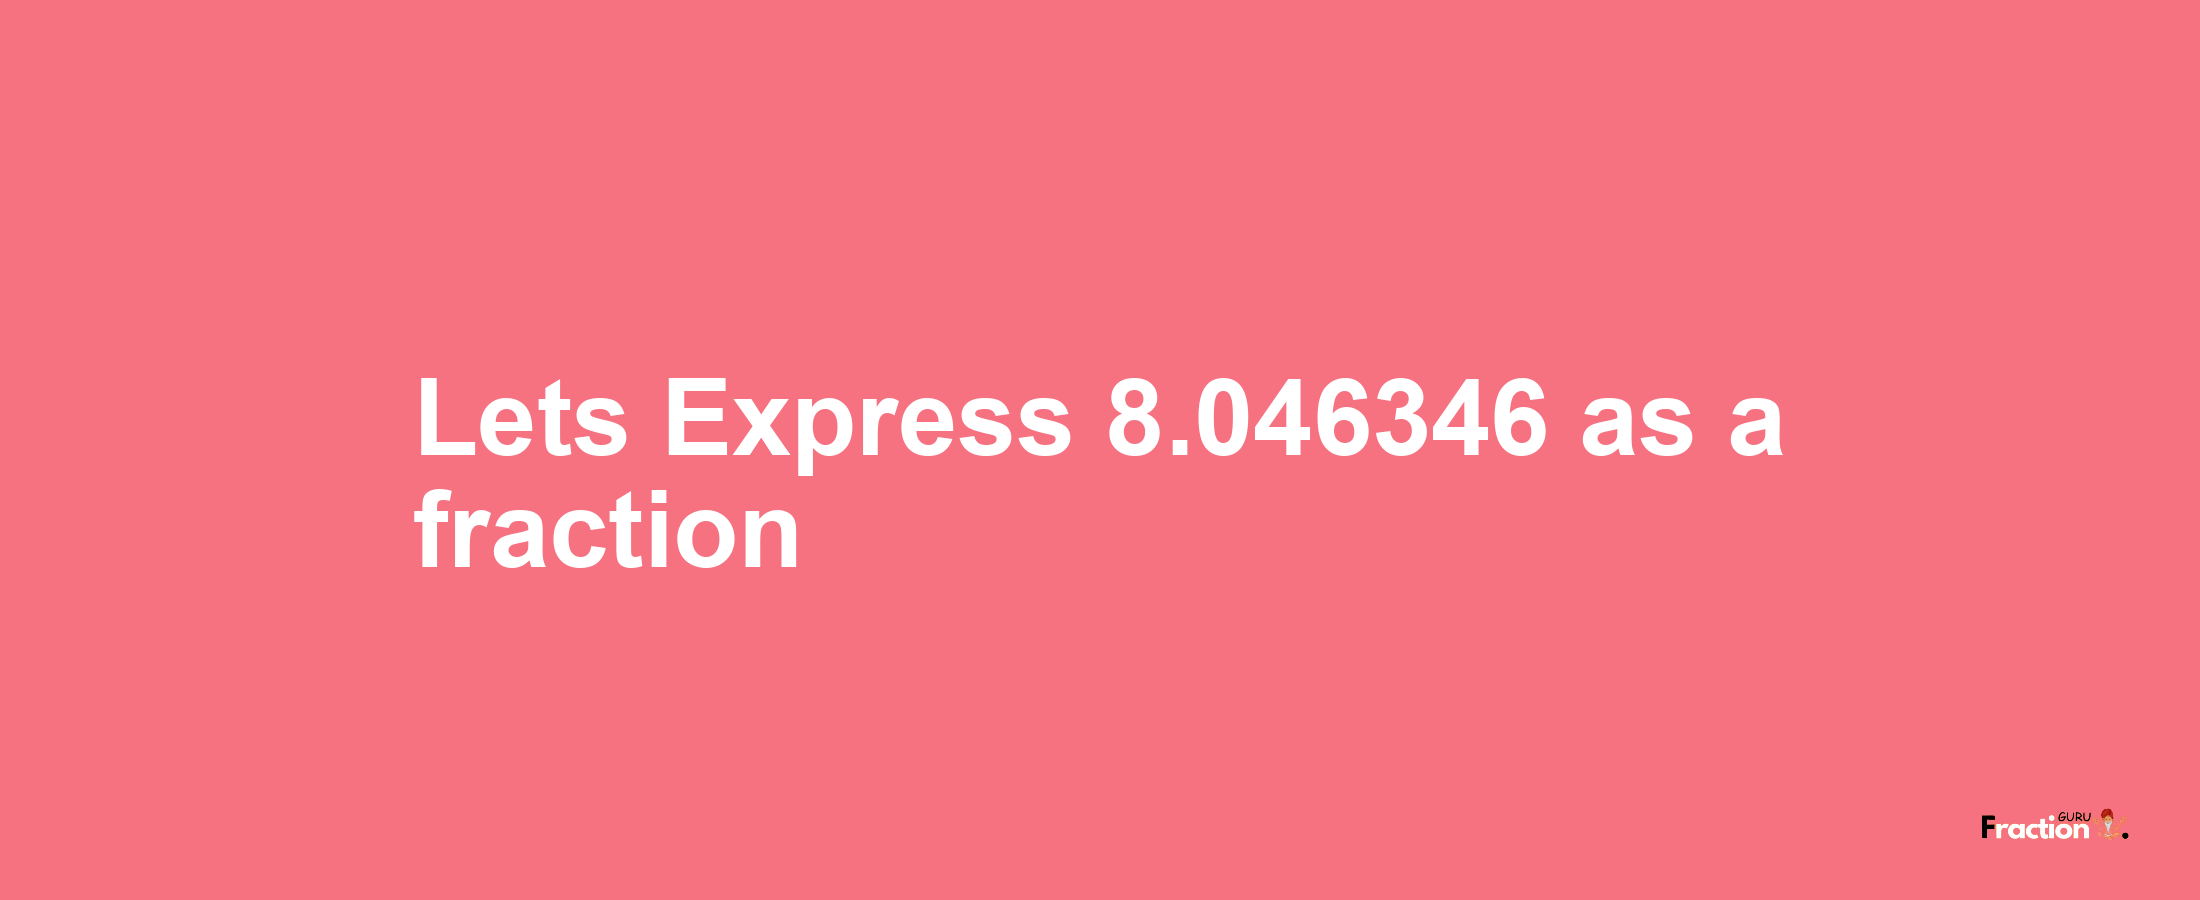 Lets Express 8.046346 as afraction